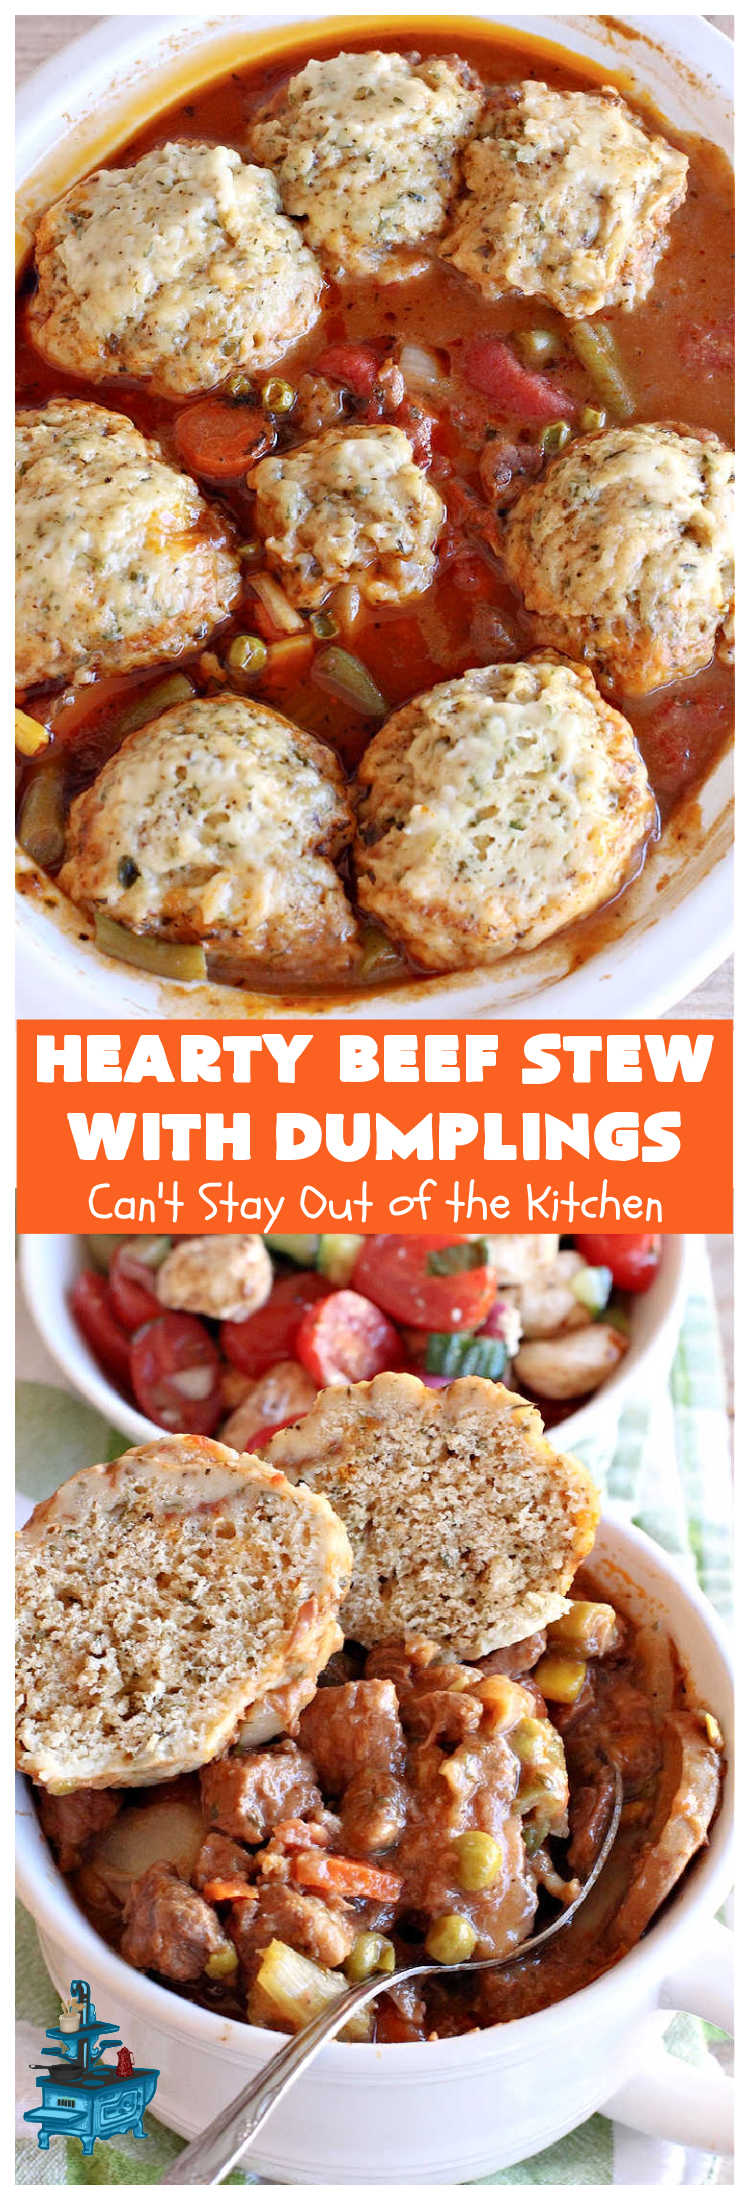 Hearty Beef Stew with Dumplings | Can't Stay Out of the Kitchen